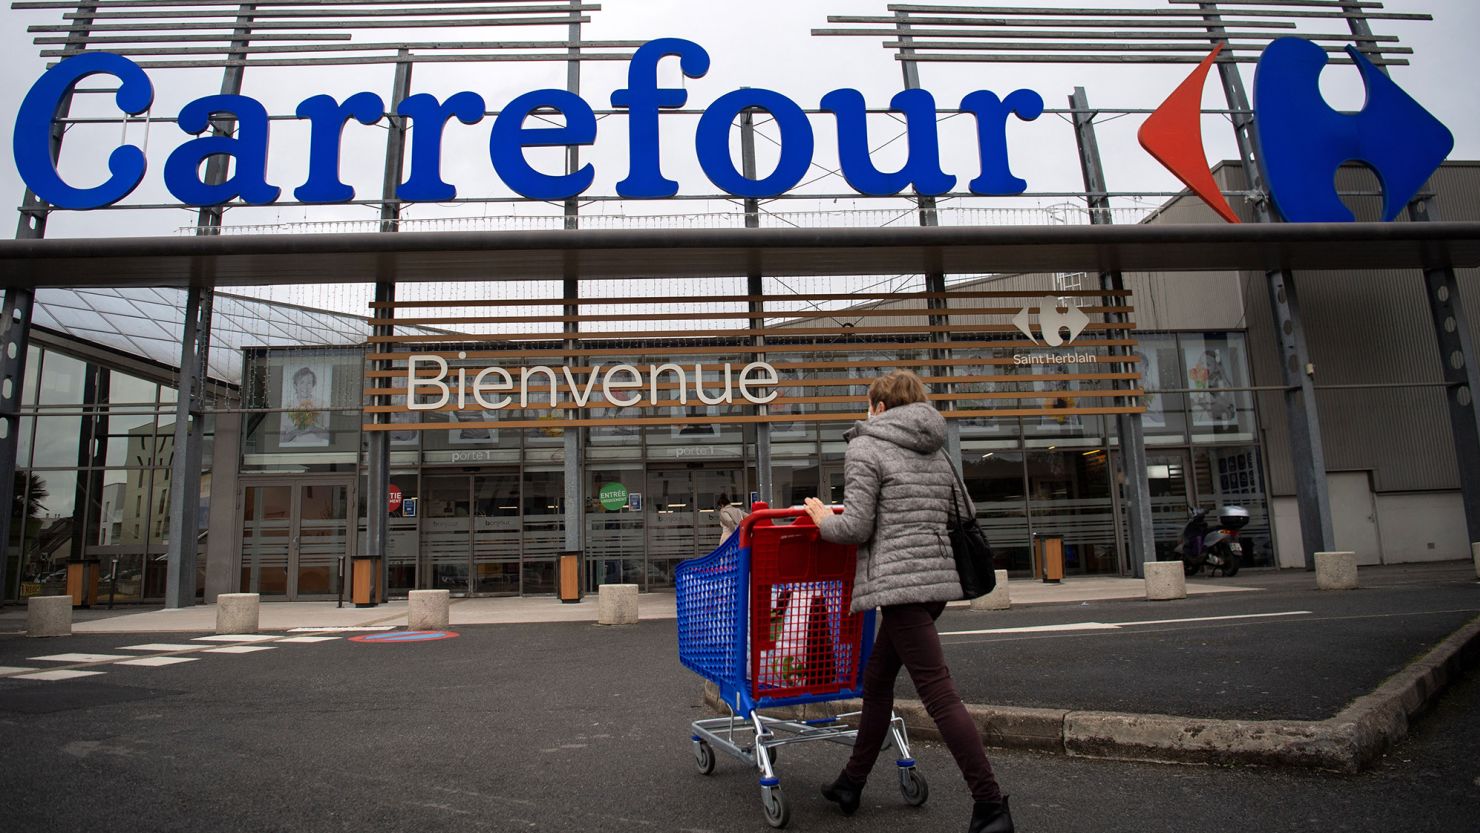 Supermarkets like Carrefour are also guilty of 'shrinkflation' in their private label products.